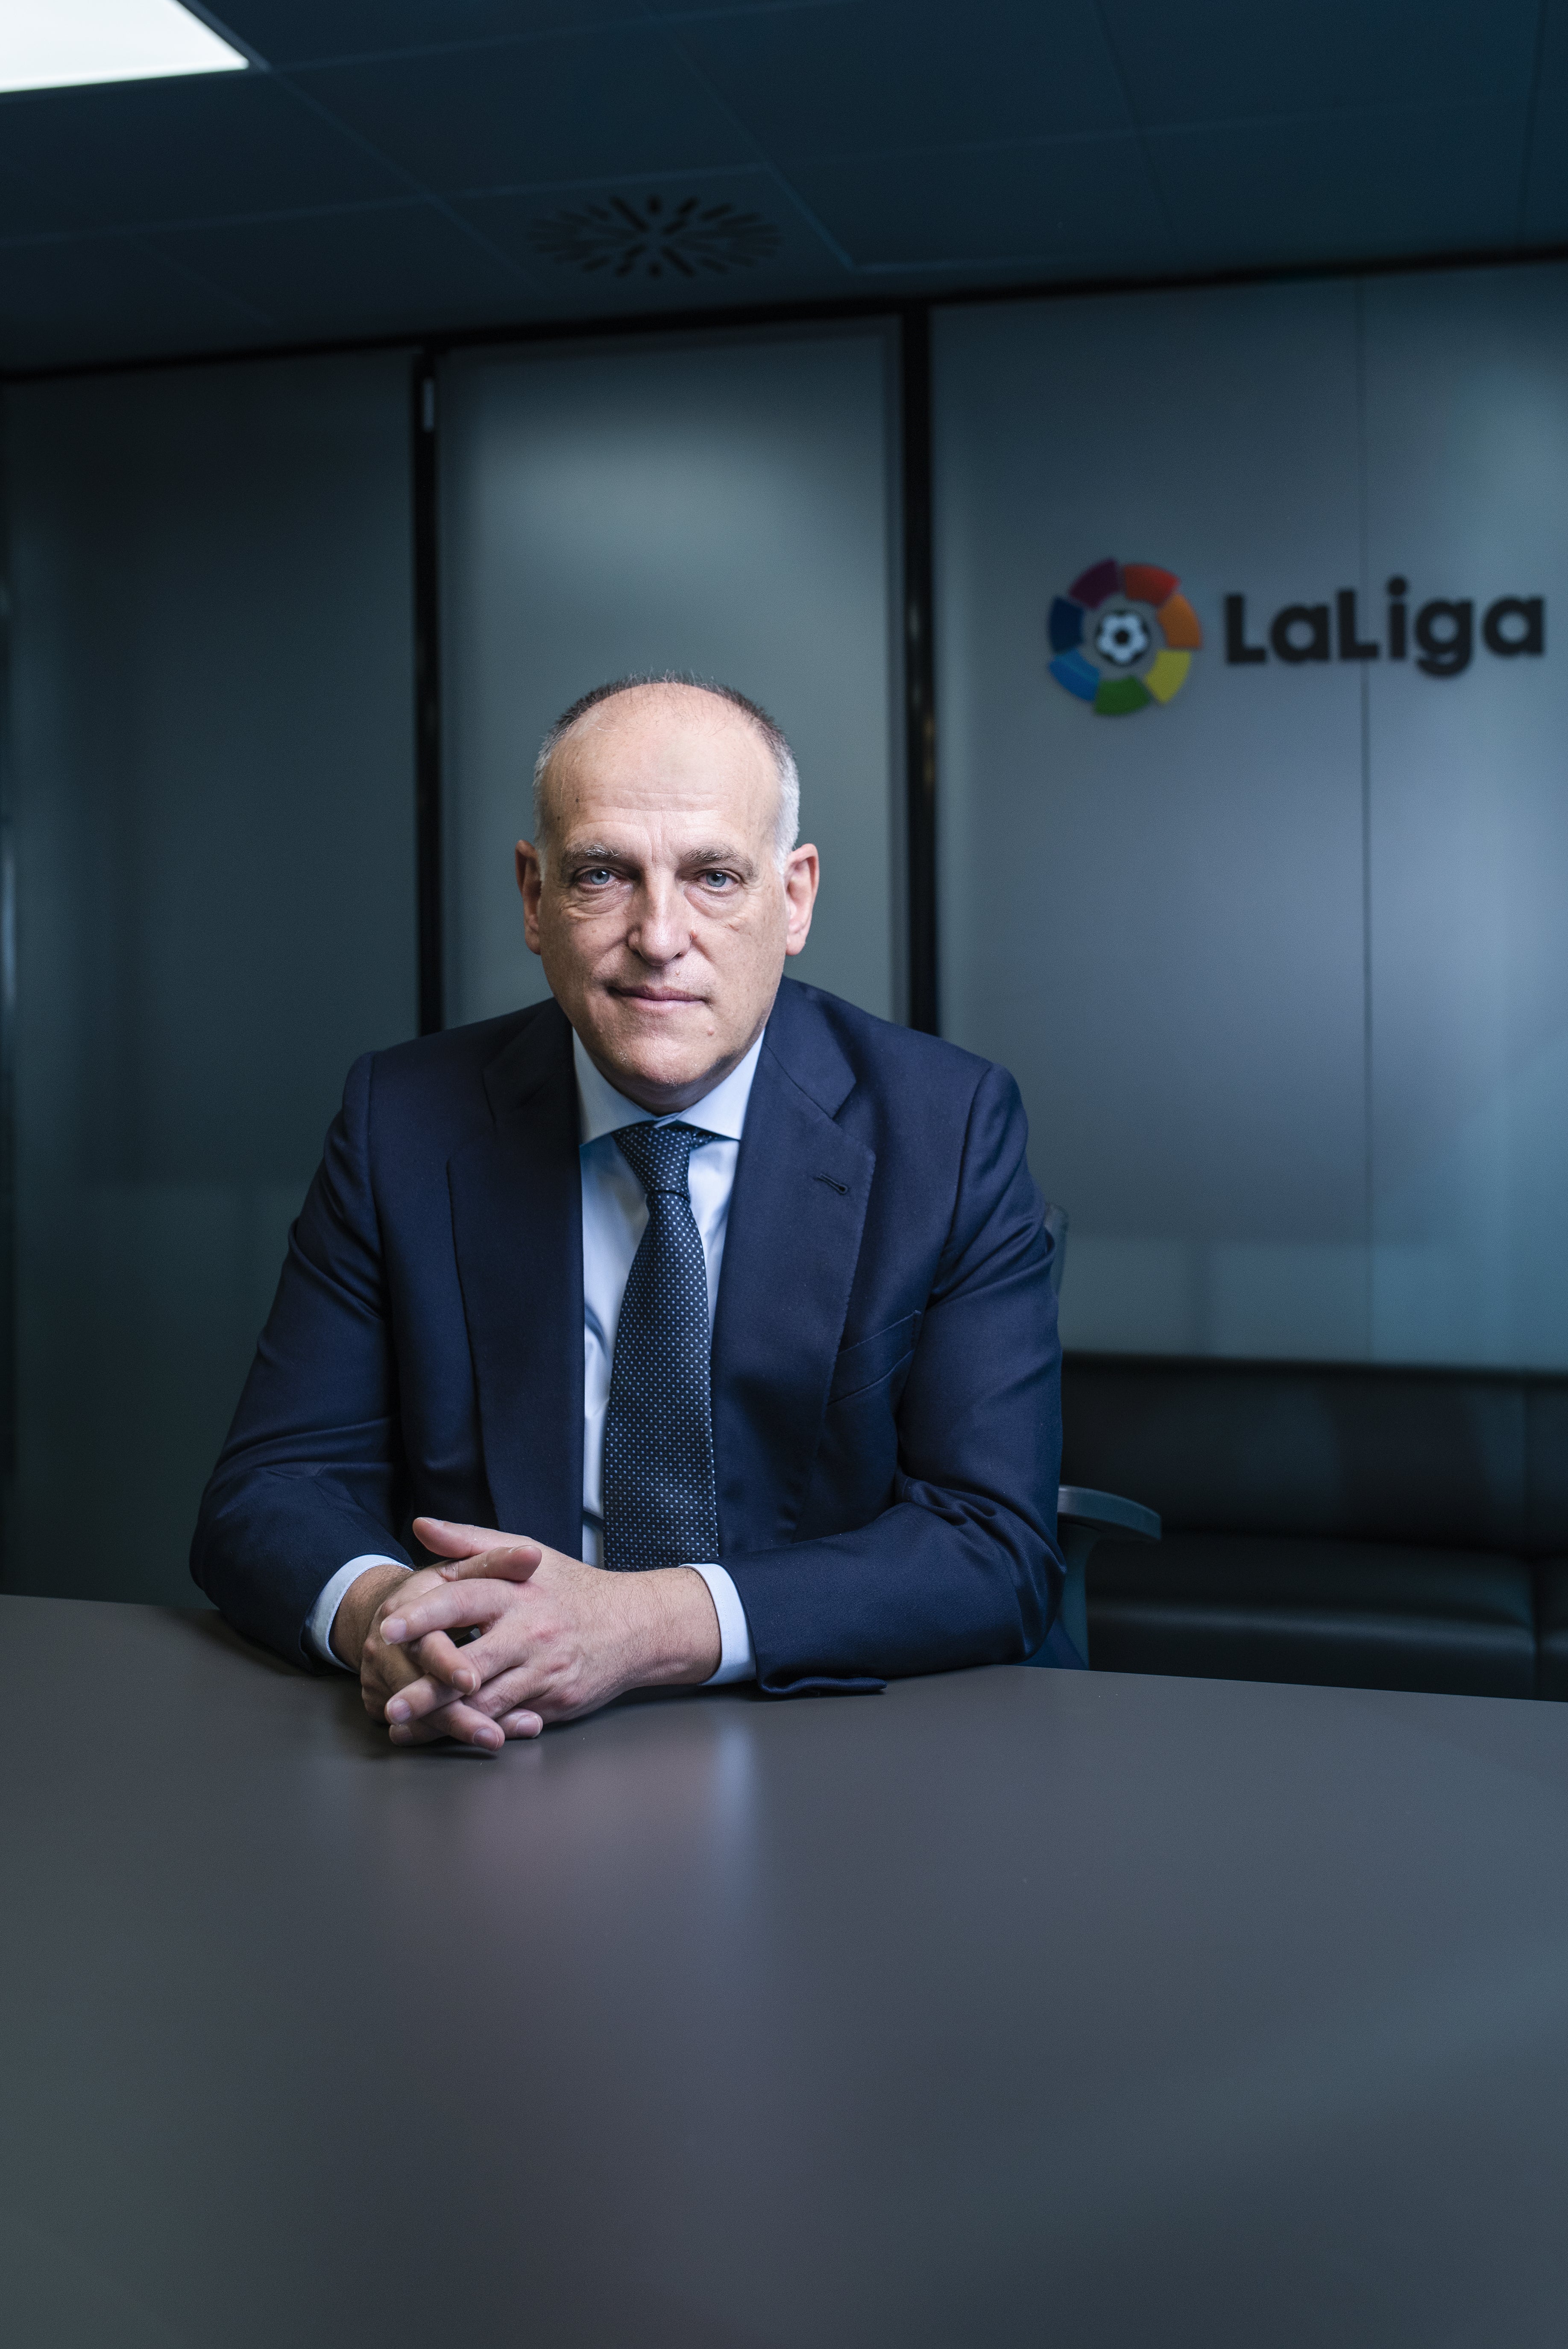 LaLiga president Javier Tebas believes the architects of last year’s Super League are working on new plans (Handout/PA)